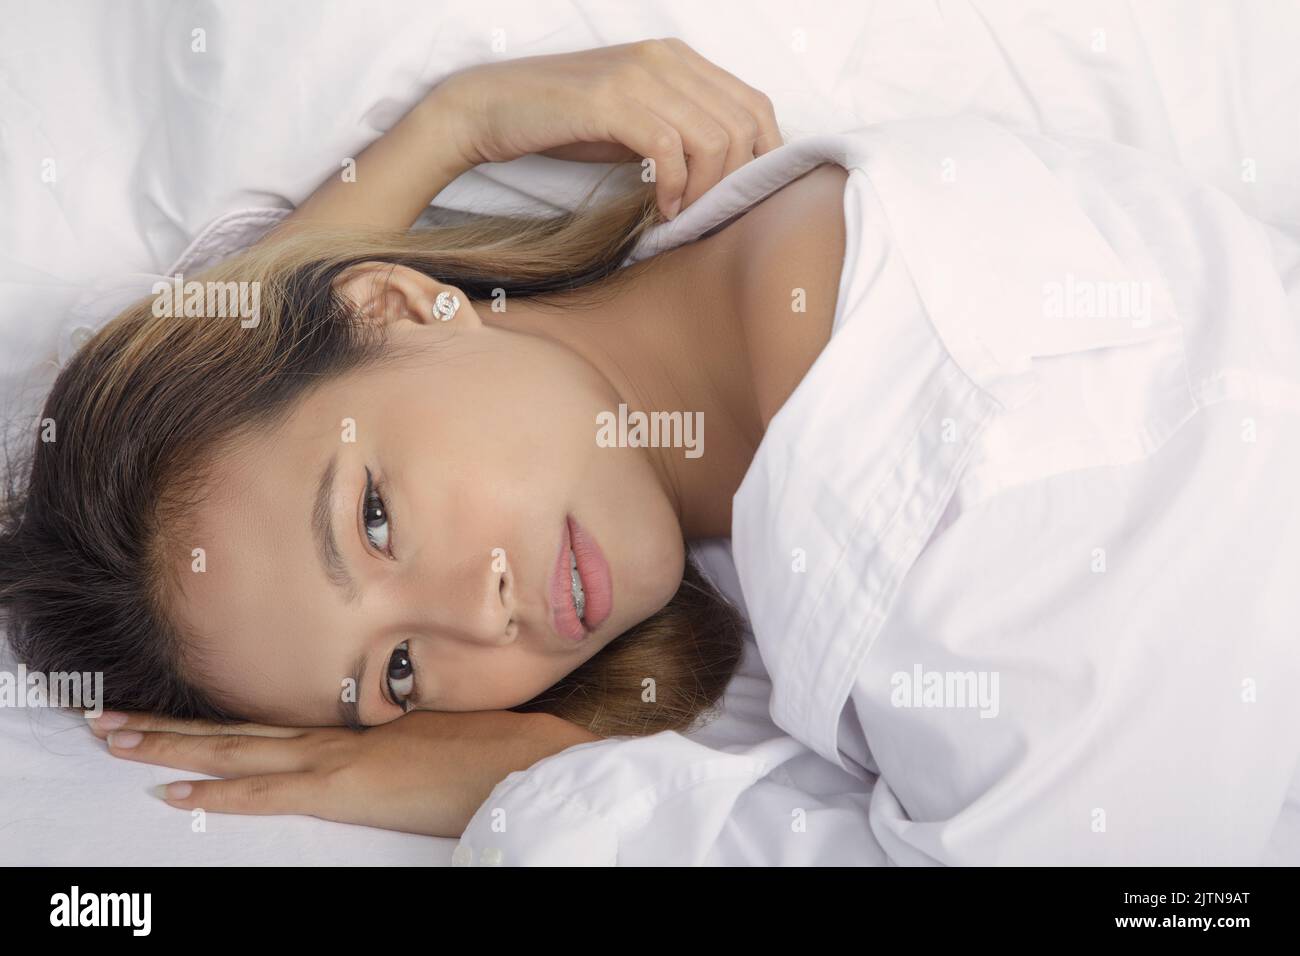 Beautiful Asian woman posing nude on a bed wearing a white shirt with white sheets Stock Photo